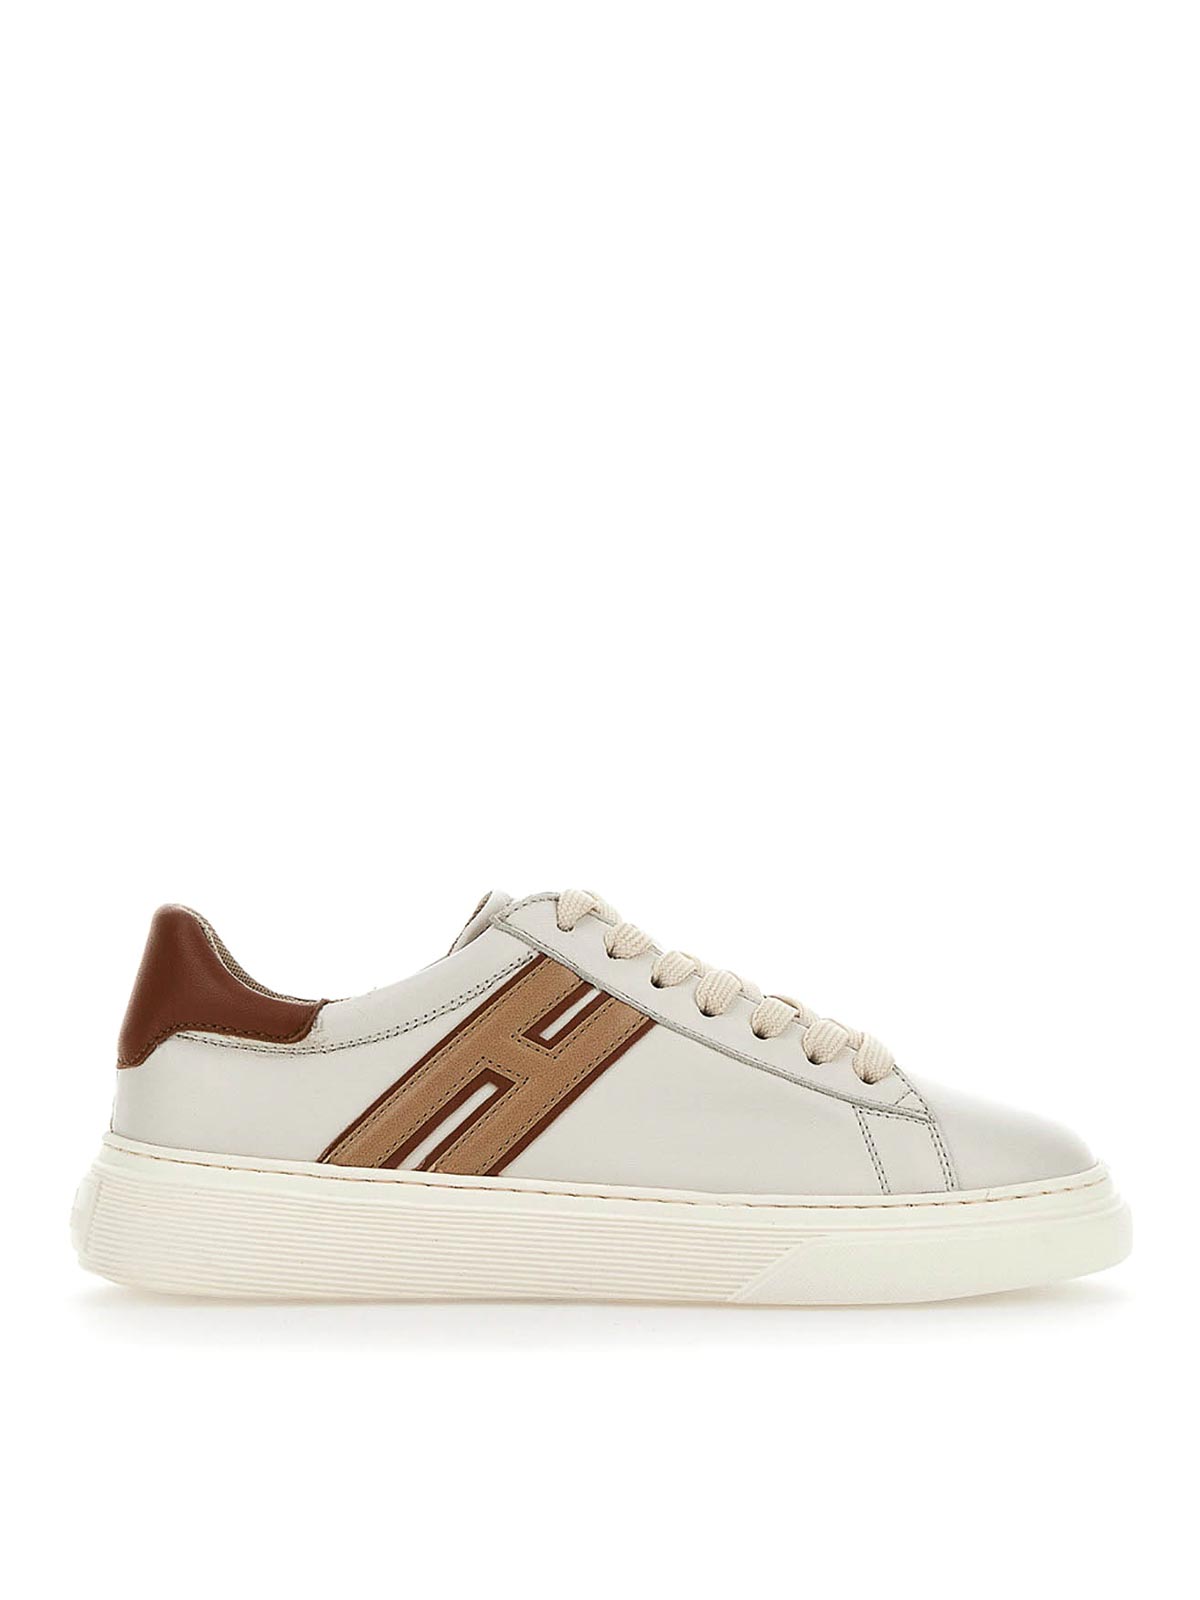 Hogan Leather Sneakers In Crema